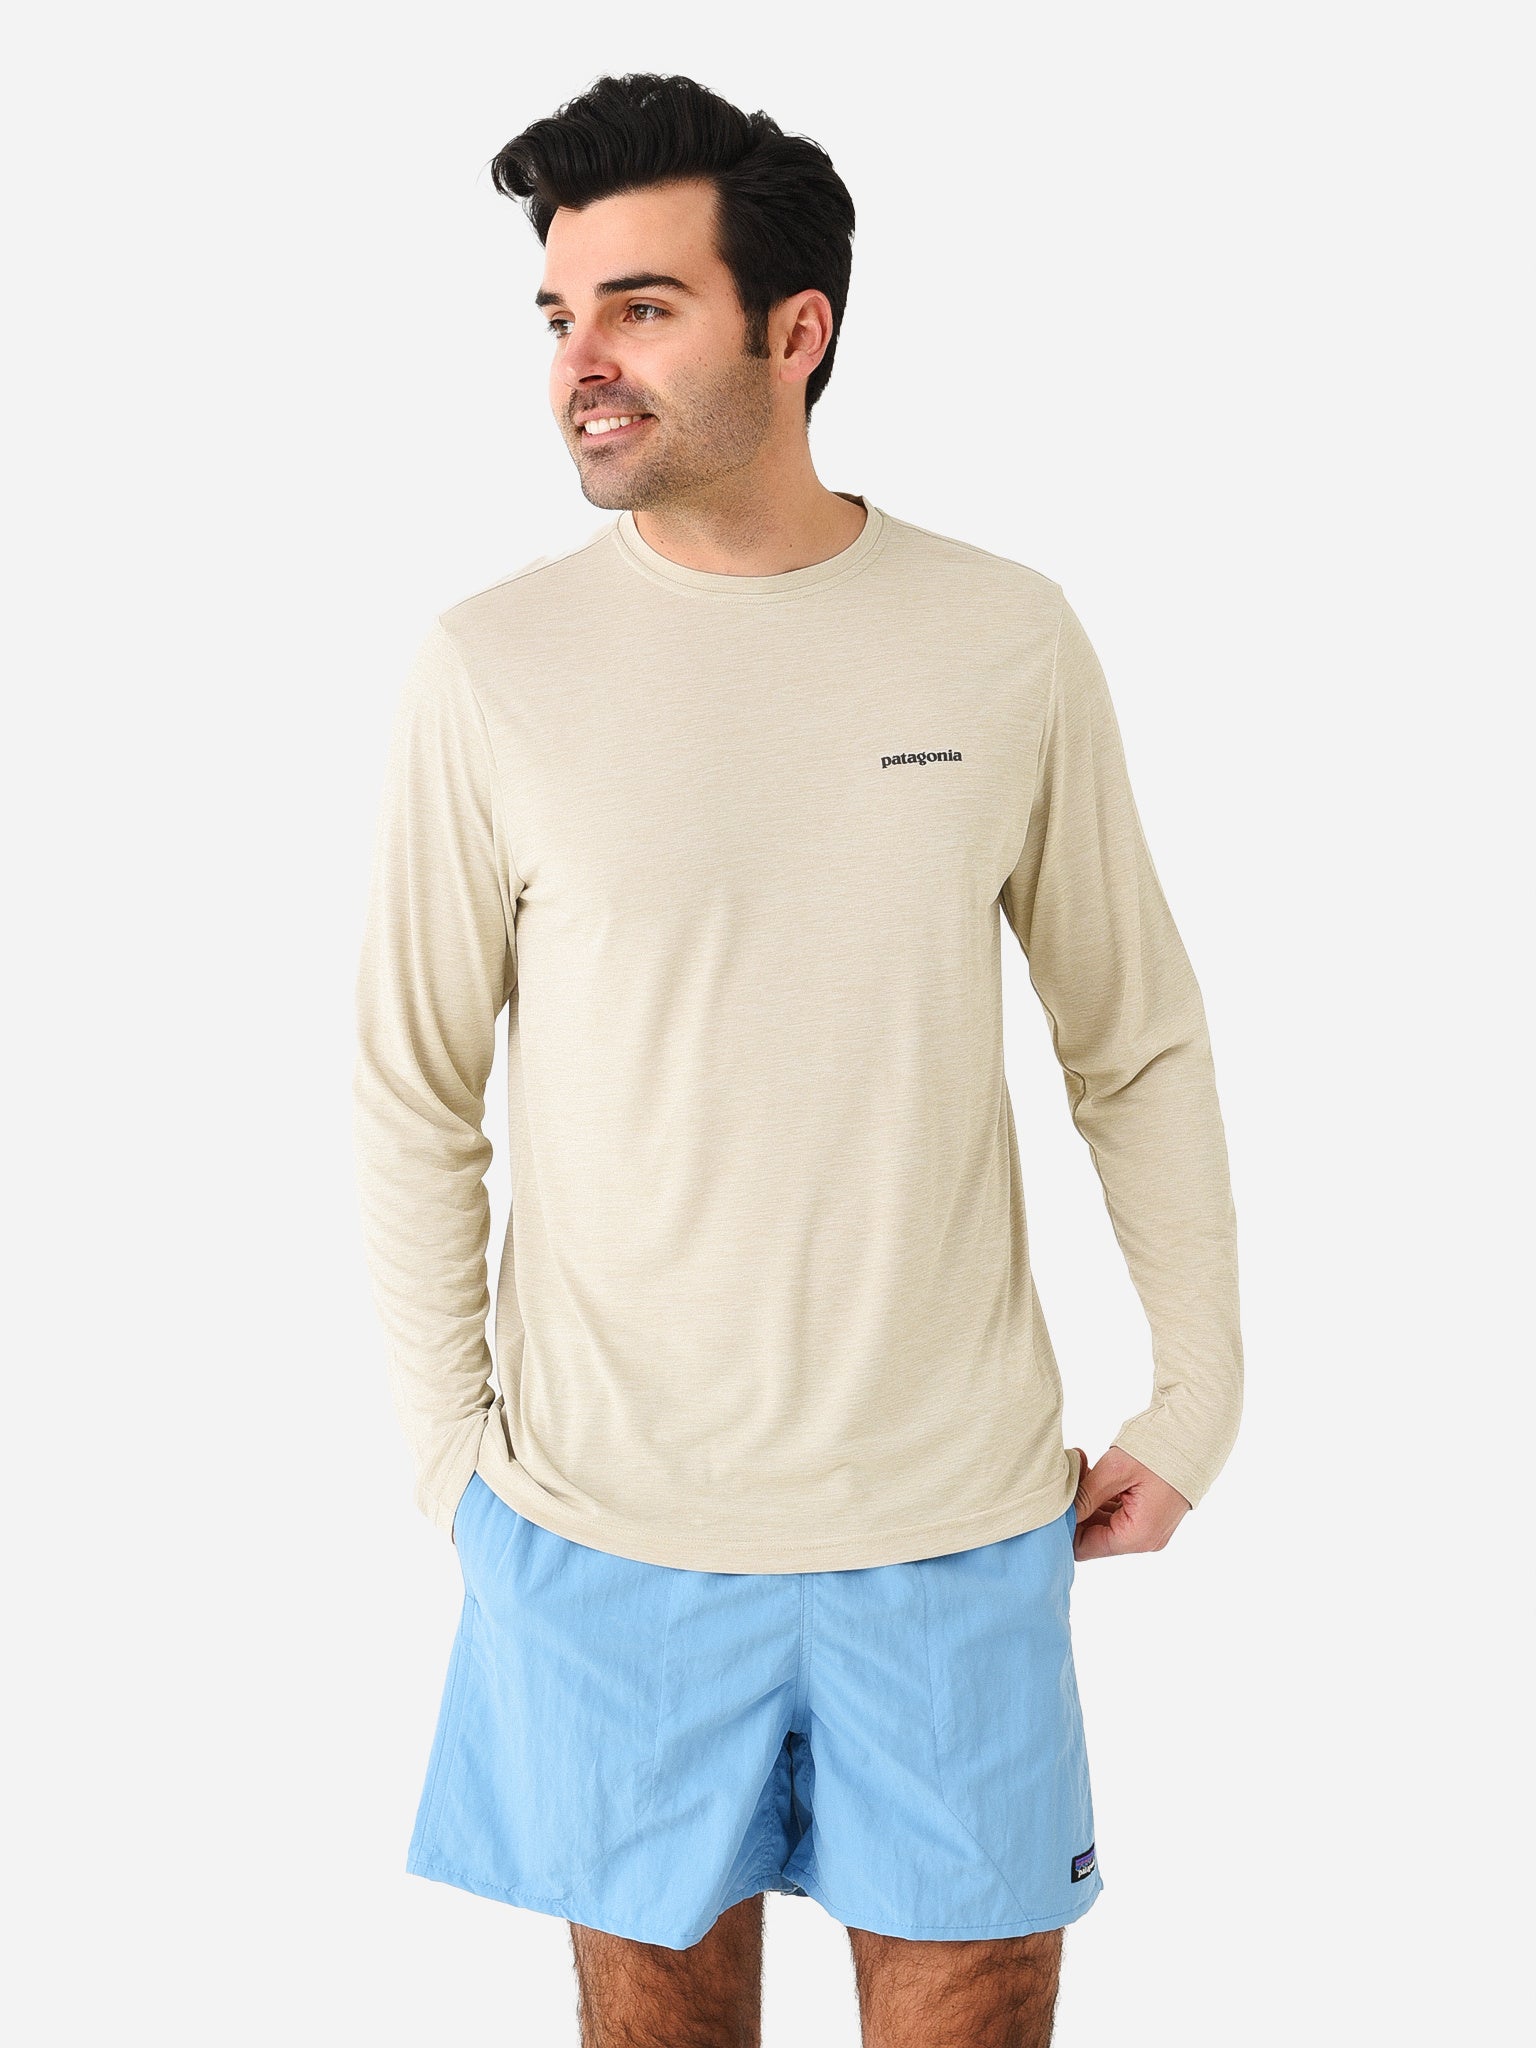 Men’s Patagonia Fly Fishing Graphic Long Sleeve Tee